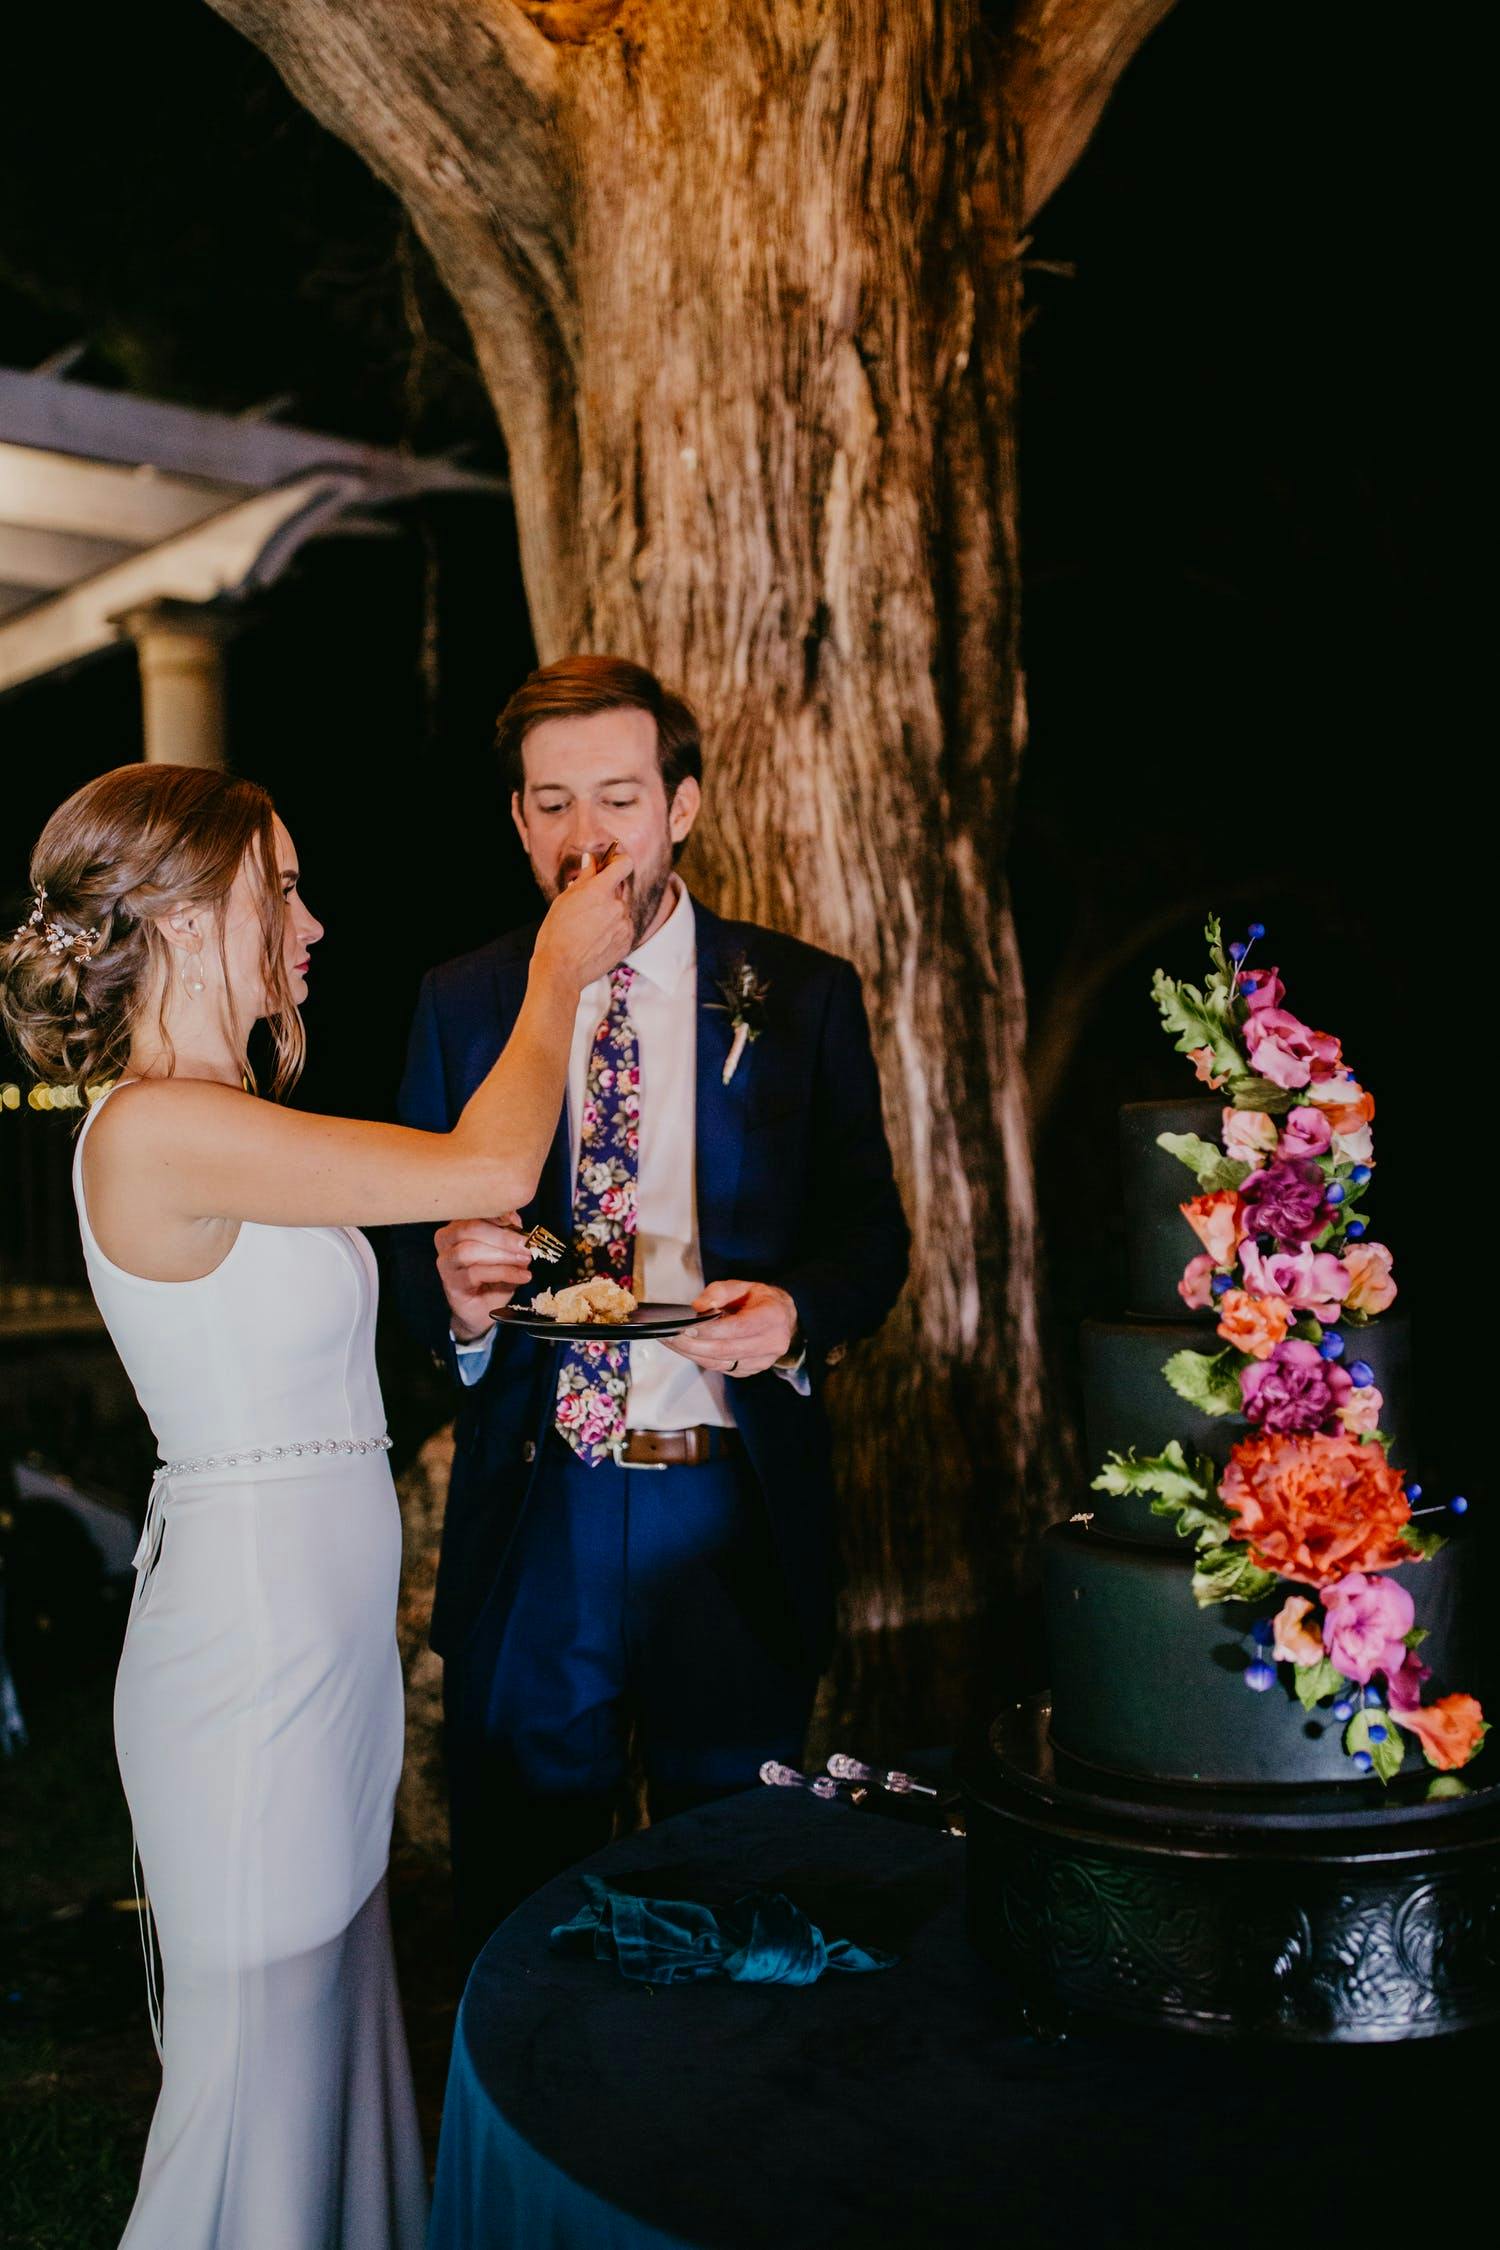 Bride and groom cut black wedding cake with colorful flowers at evening outdoor small wedding | PartySlate